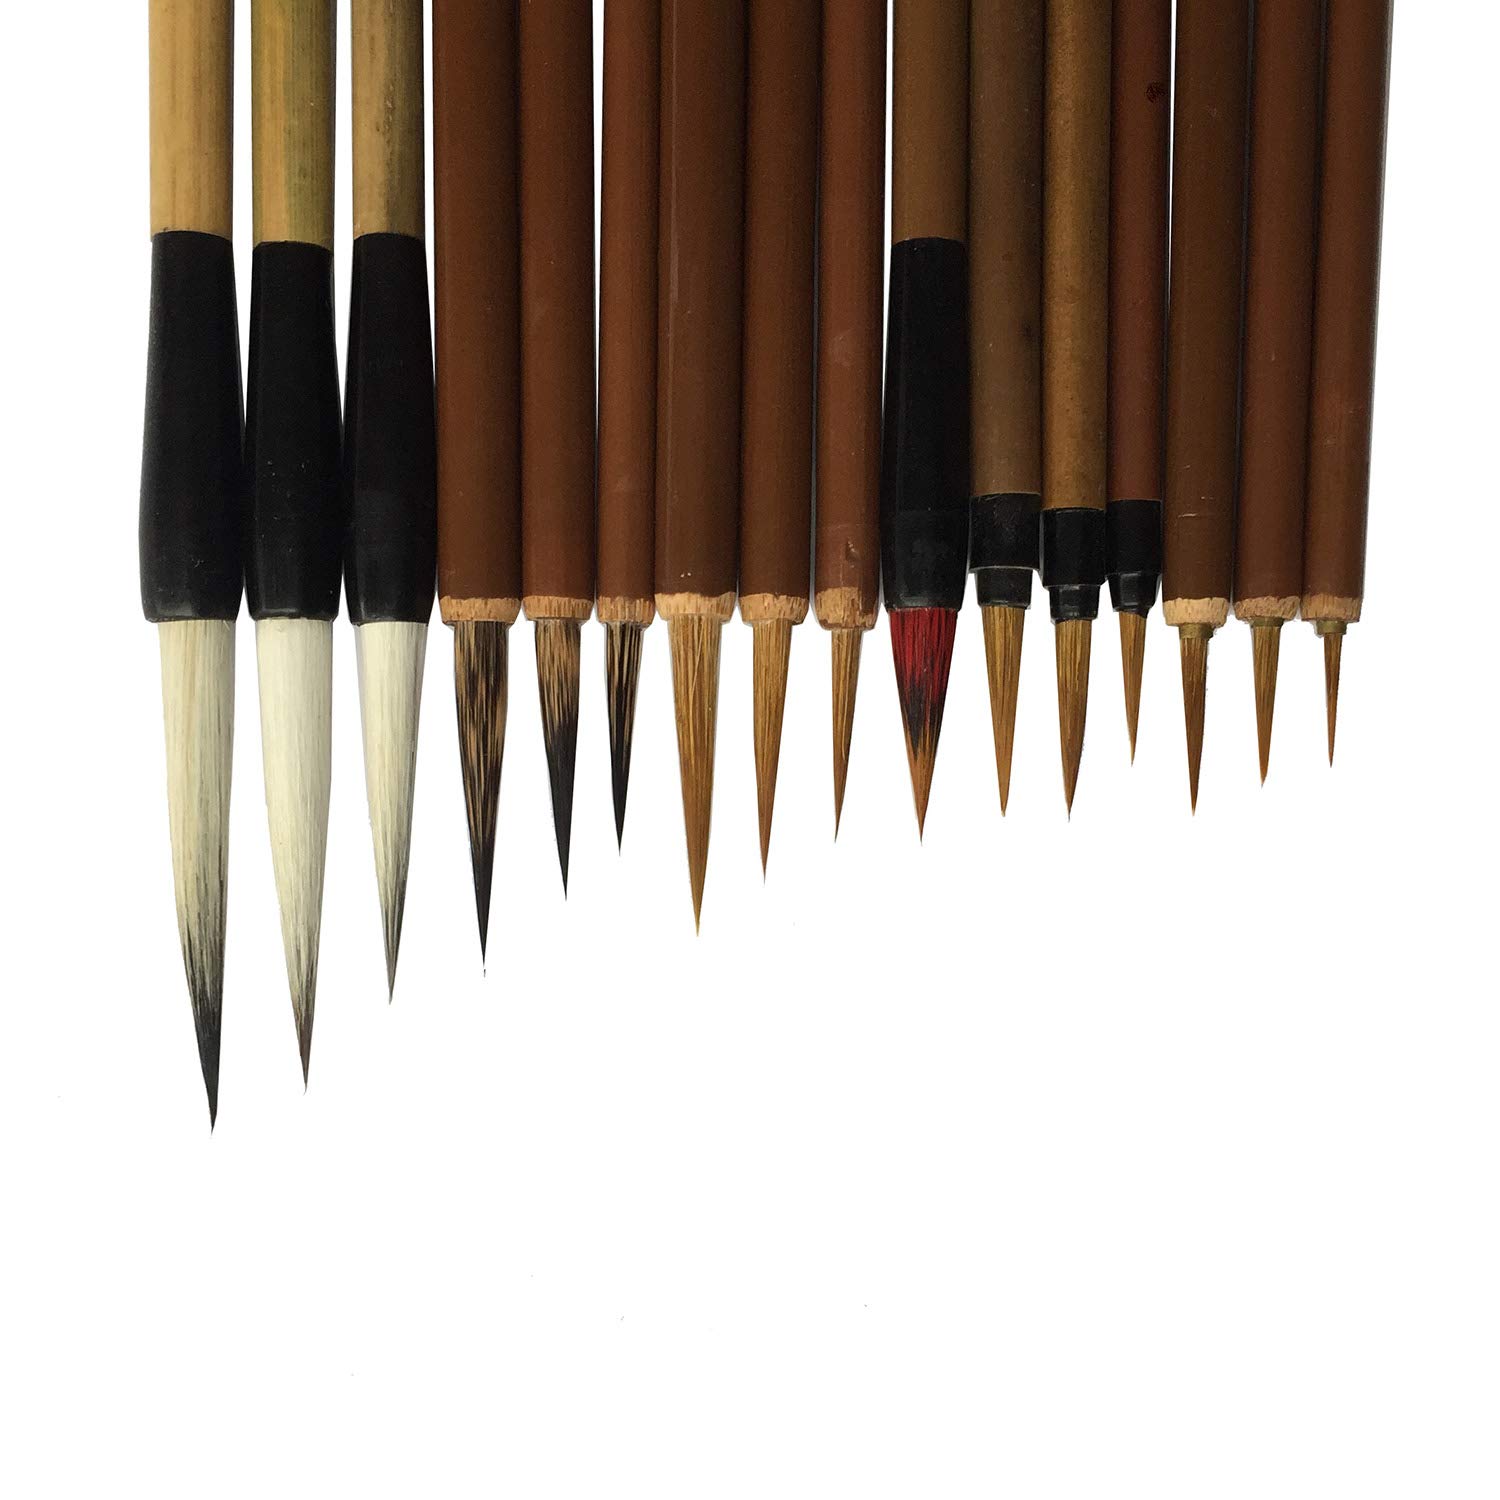 diandiandidi Chinese Writing Brush for Professional Calligrapy & Painting (16-piece Set)